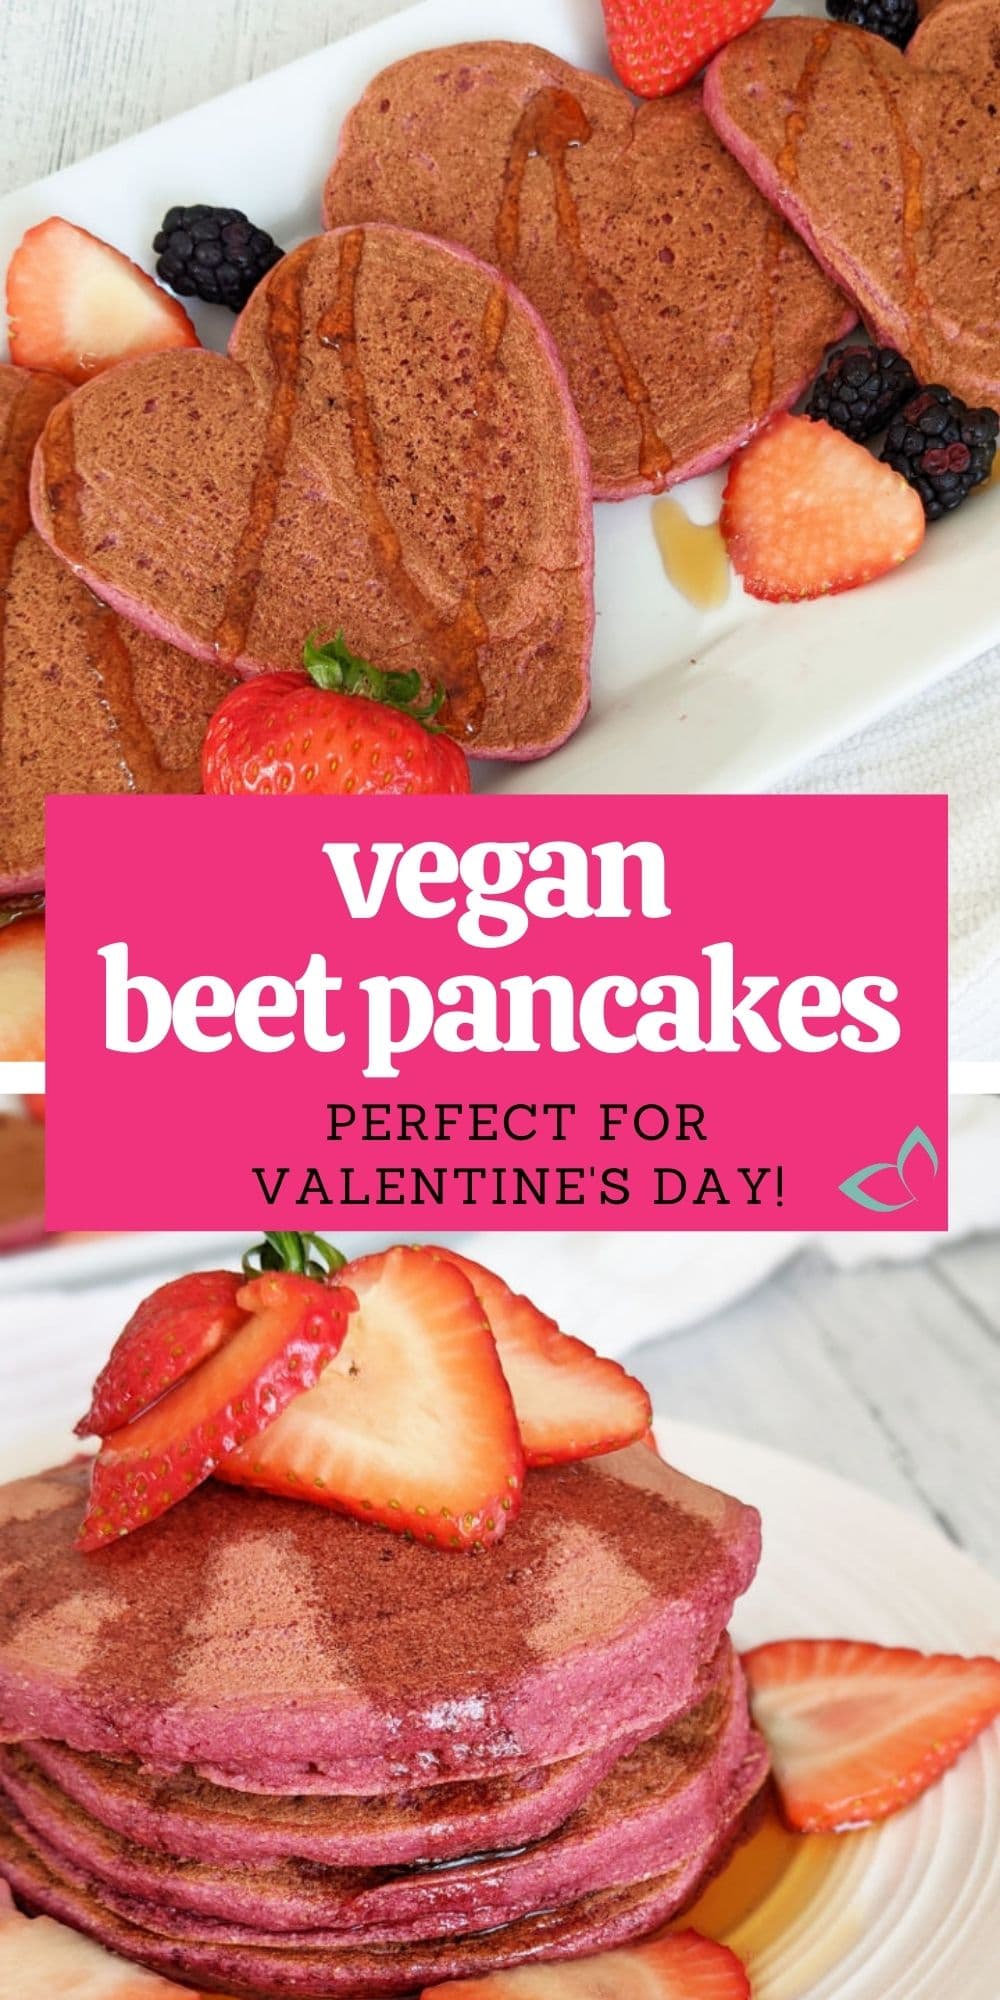 These beautiful beet pancakes are the perfect breakfast treat on Valentine's Day or any day you just want some fun color in your food. They're healthy, made with beets, whole wheat flour and are both oil free and dairy free but still incredibly scrumptious!